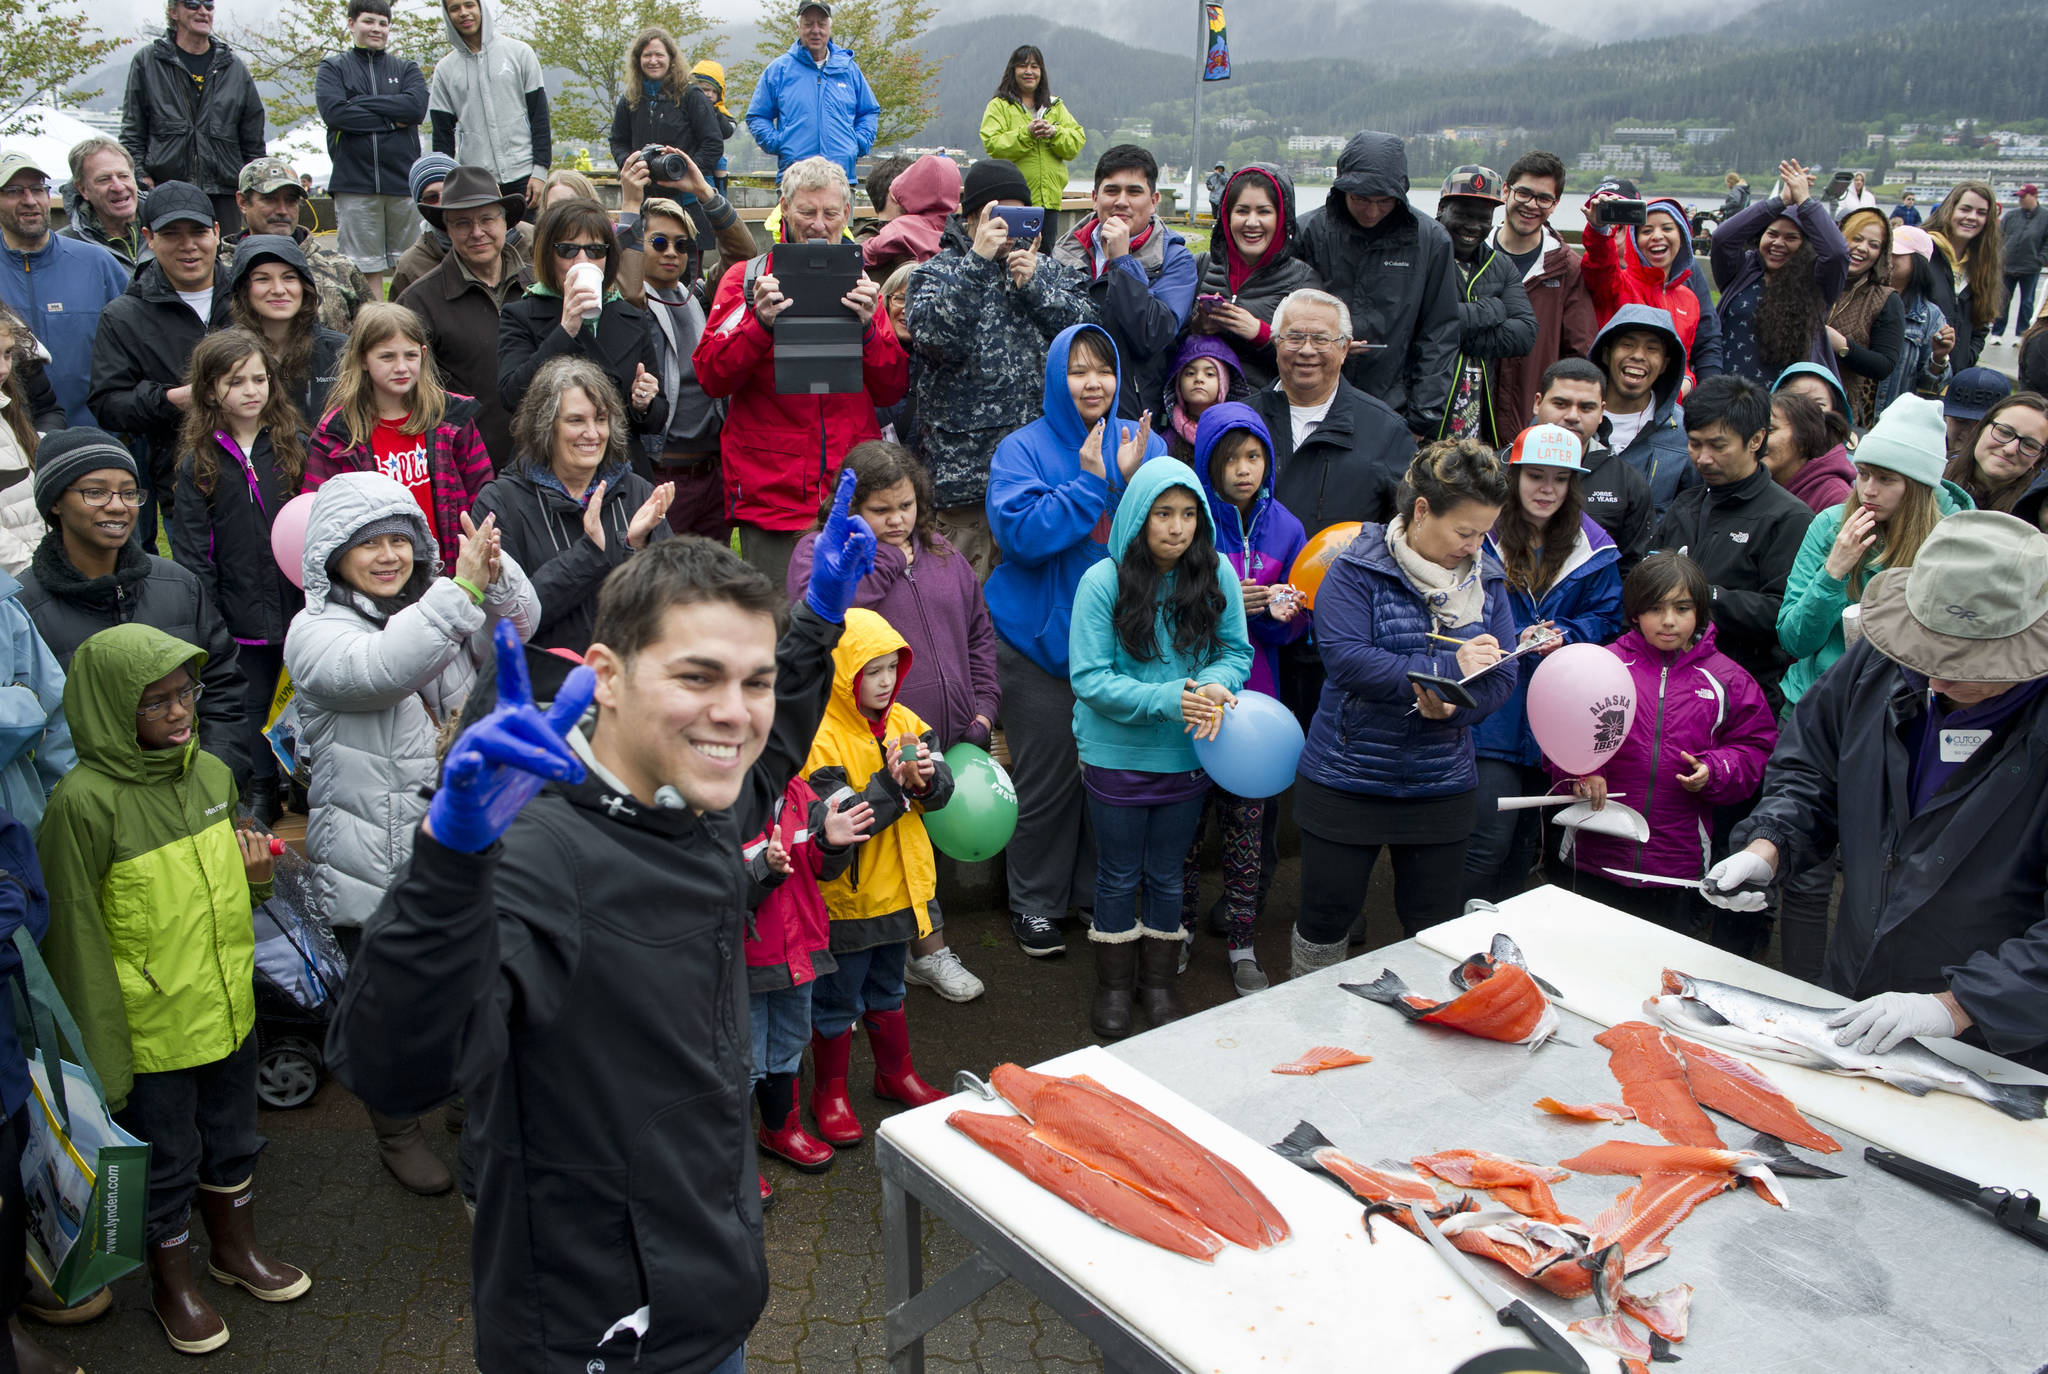 Irat De La Mora acknowledges the crowd after showing his talent for slicing up coho salmon at the Juneau Maritime Festival at Marine Park in Juneau on Saturday, May 7, 2016. (Michael Penn | Juneau Empire File)